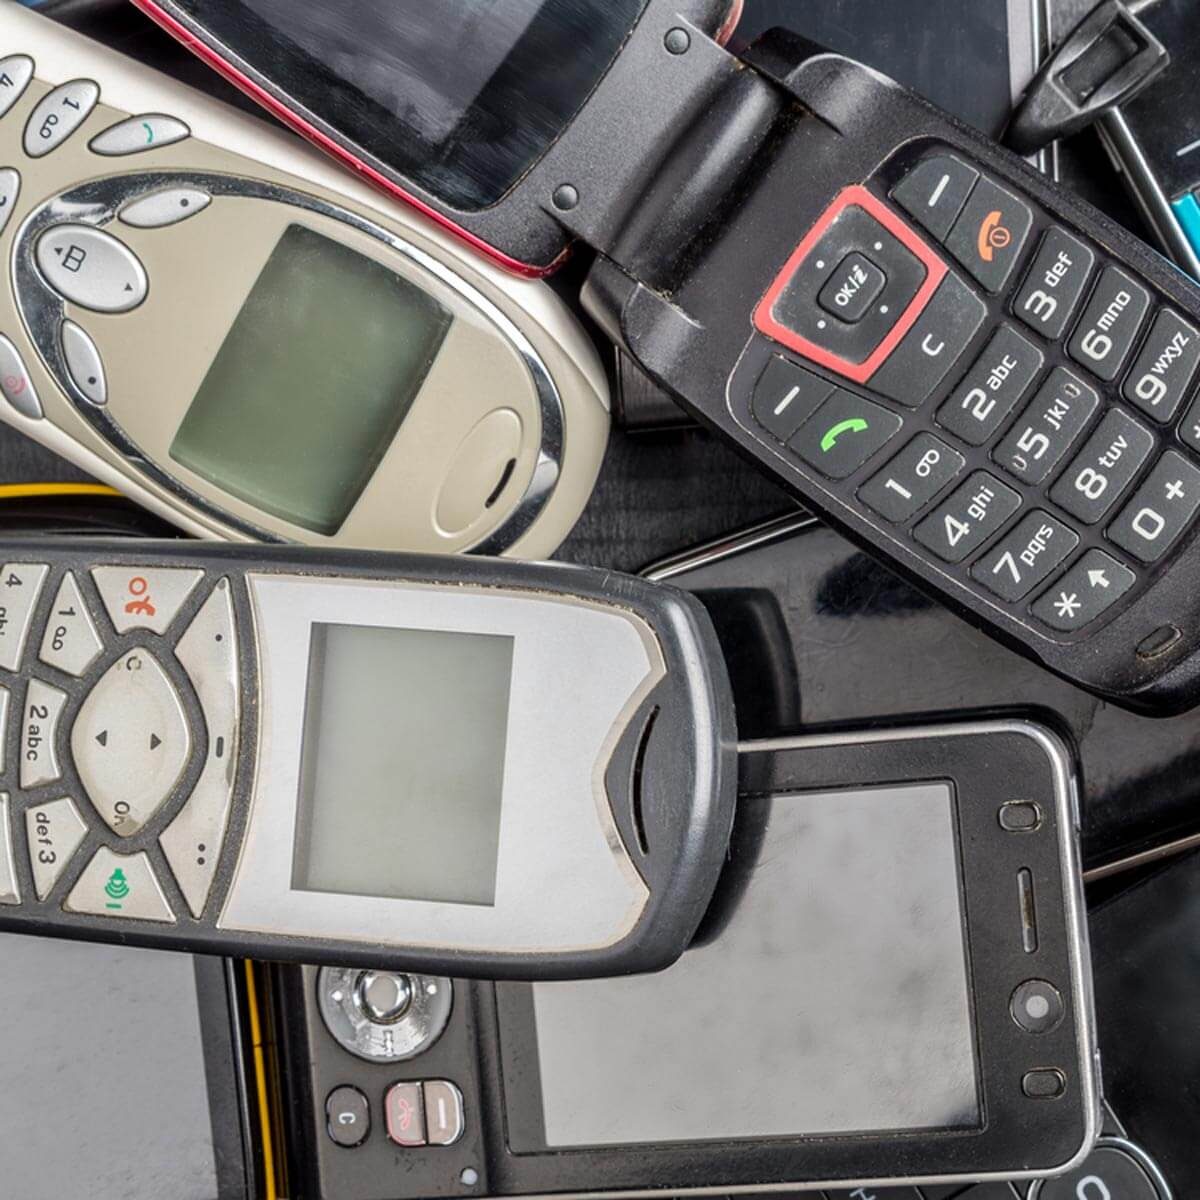 What You Should Do With Your Old Cell Phone?